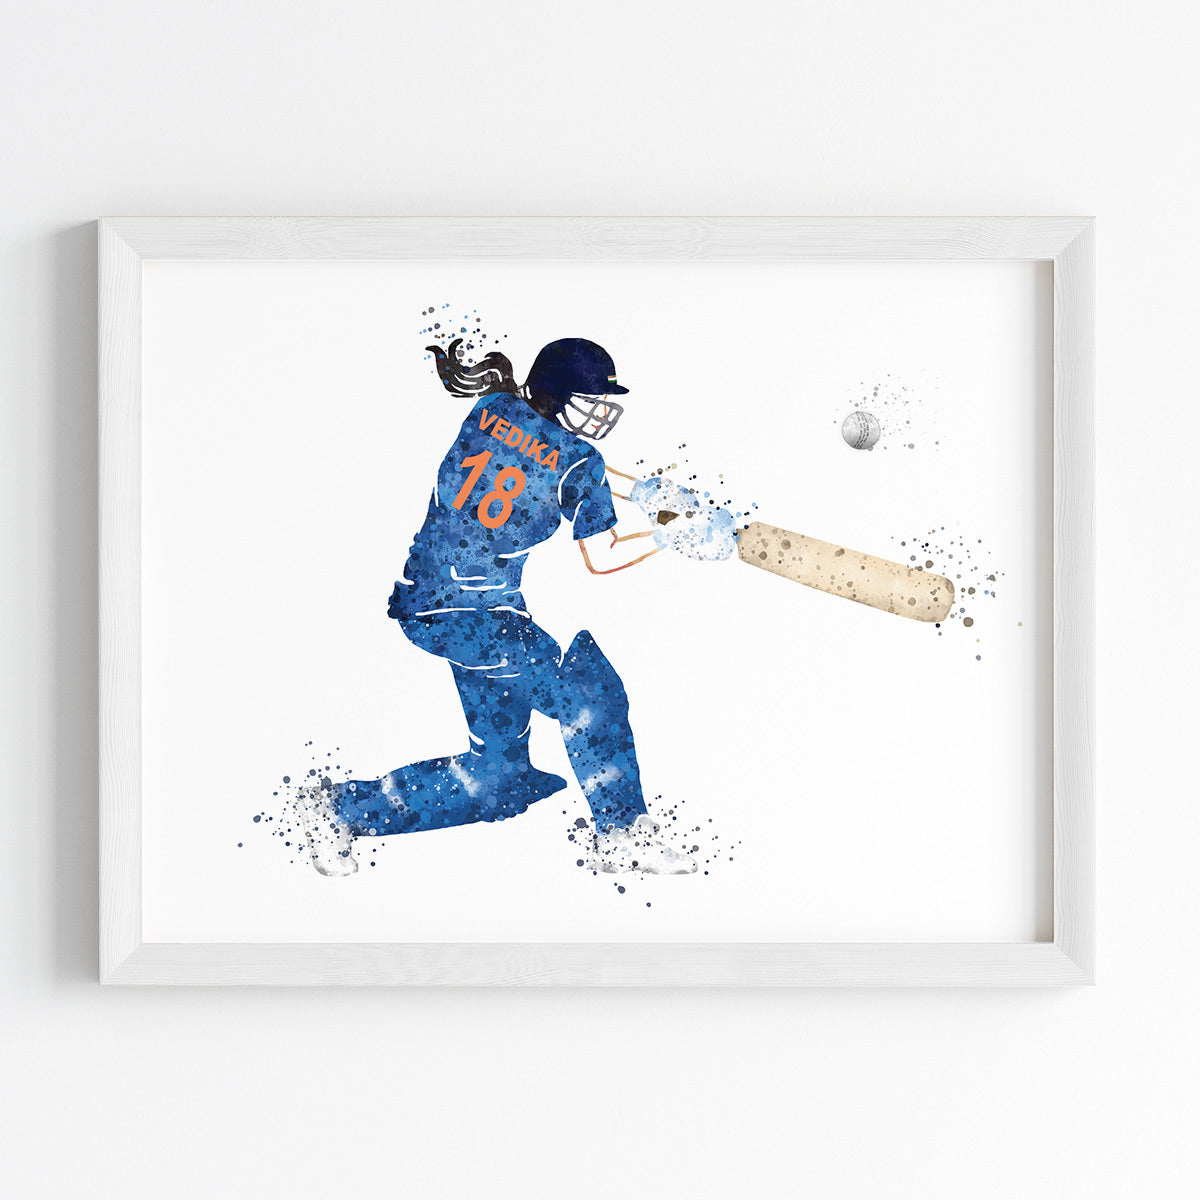 Cricket Batsman Playing Unorthodox Shot In T20 Match, Cricket Player  Playing Scoop Shot In Test Match, Cricket Clip Art, Sports Symbol And Icon  Royalty Free SVG, Cliparts, Vectors, and Stock Illustration. Image